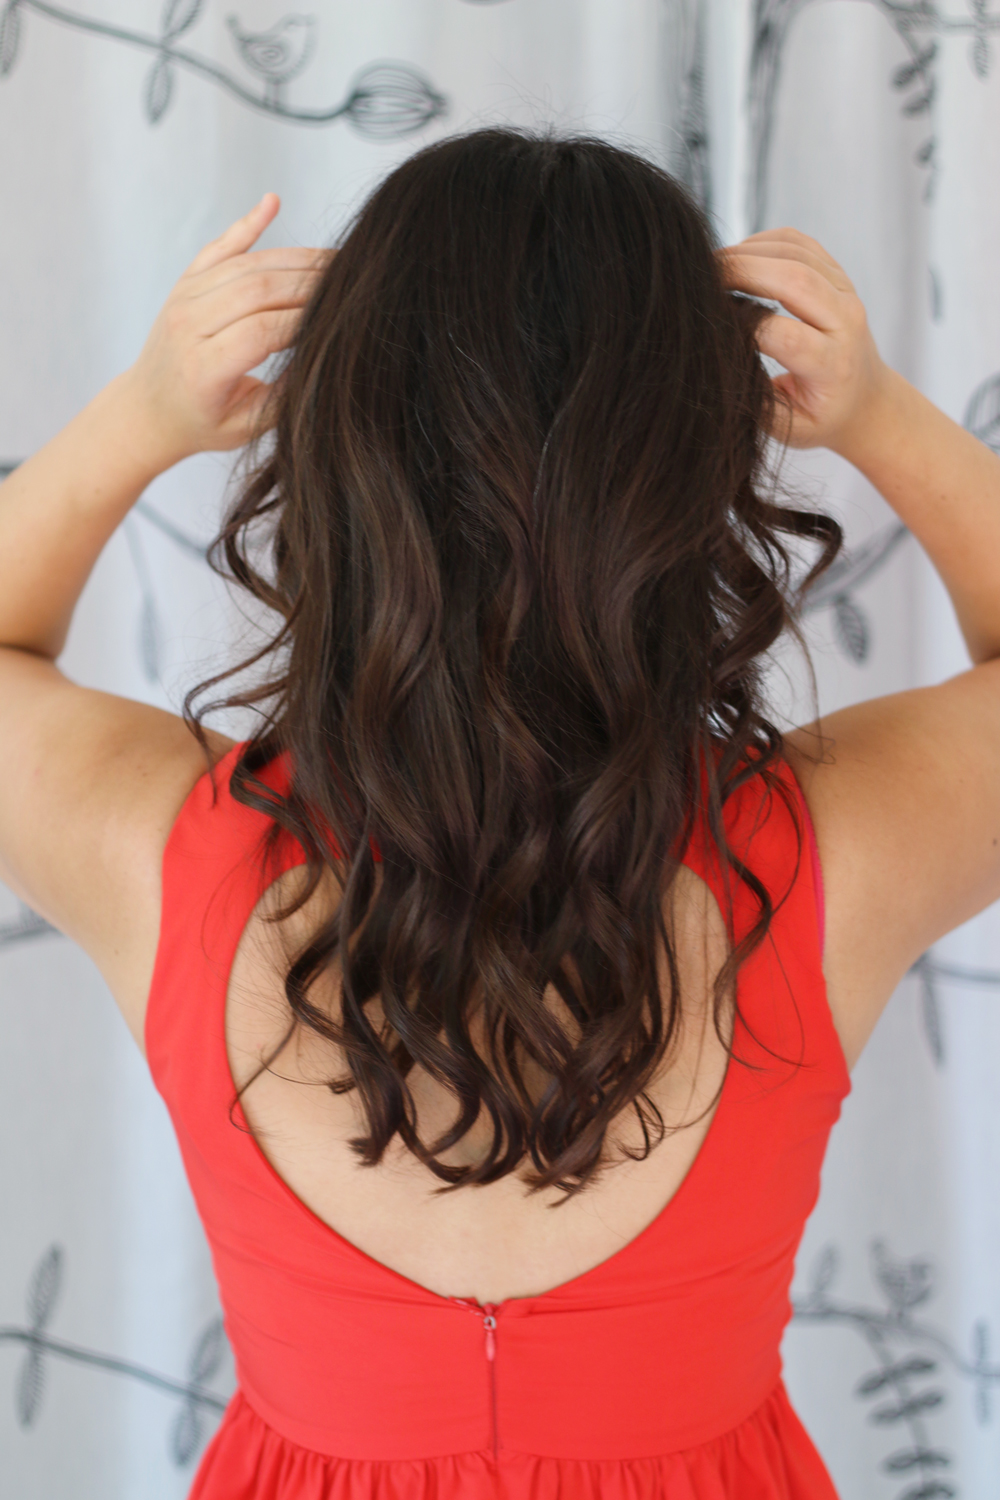 Cherry Blow Dry is a membership blow dry bar in Coral Gables, Florida.